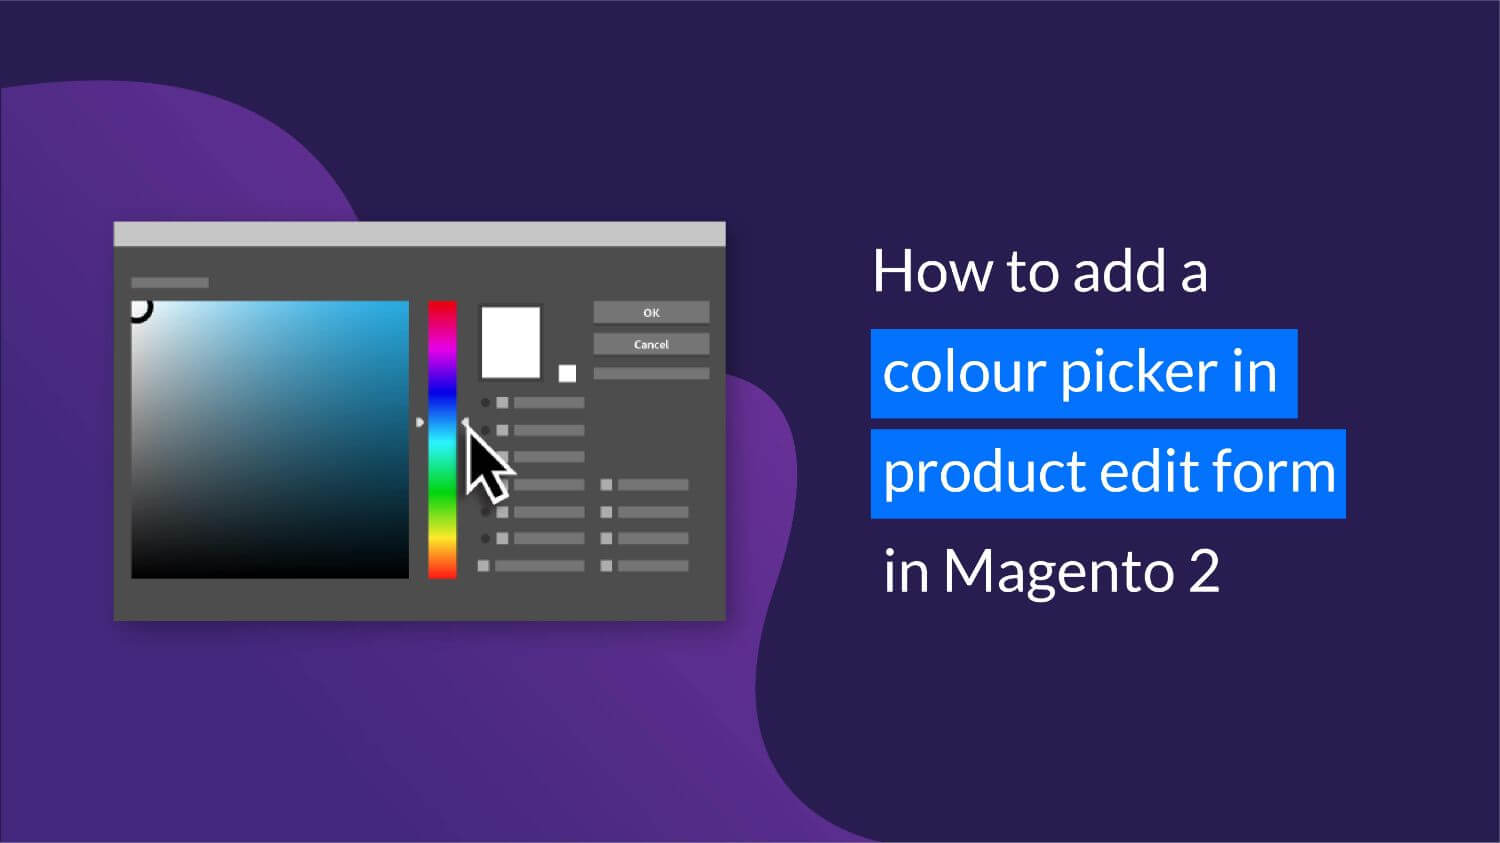 How to add a colour picker in product edit form in Magento2 title image